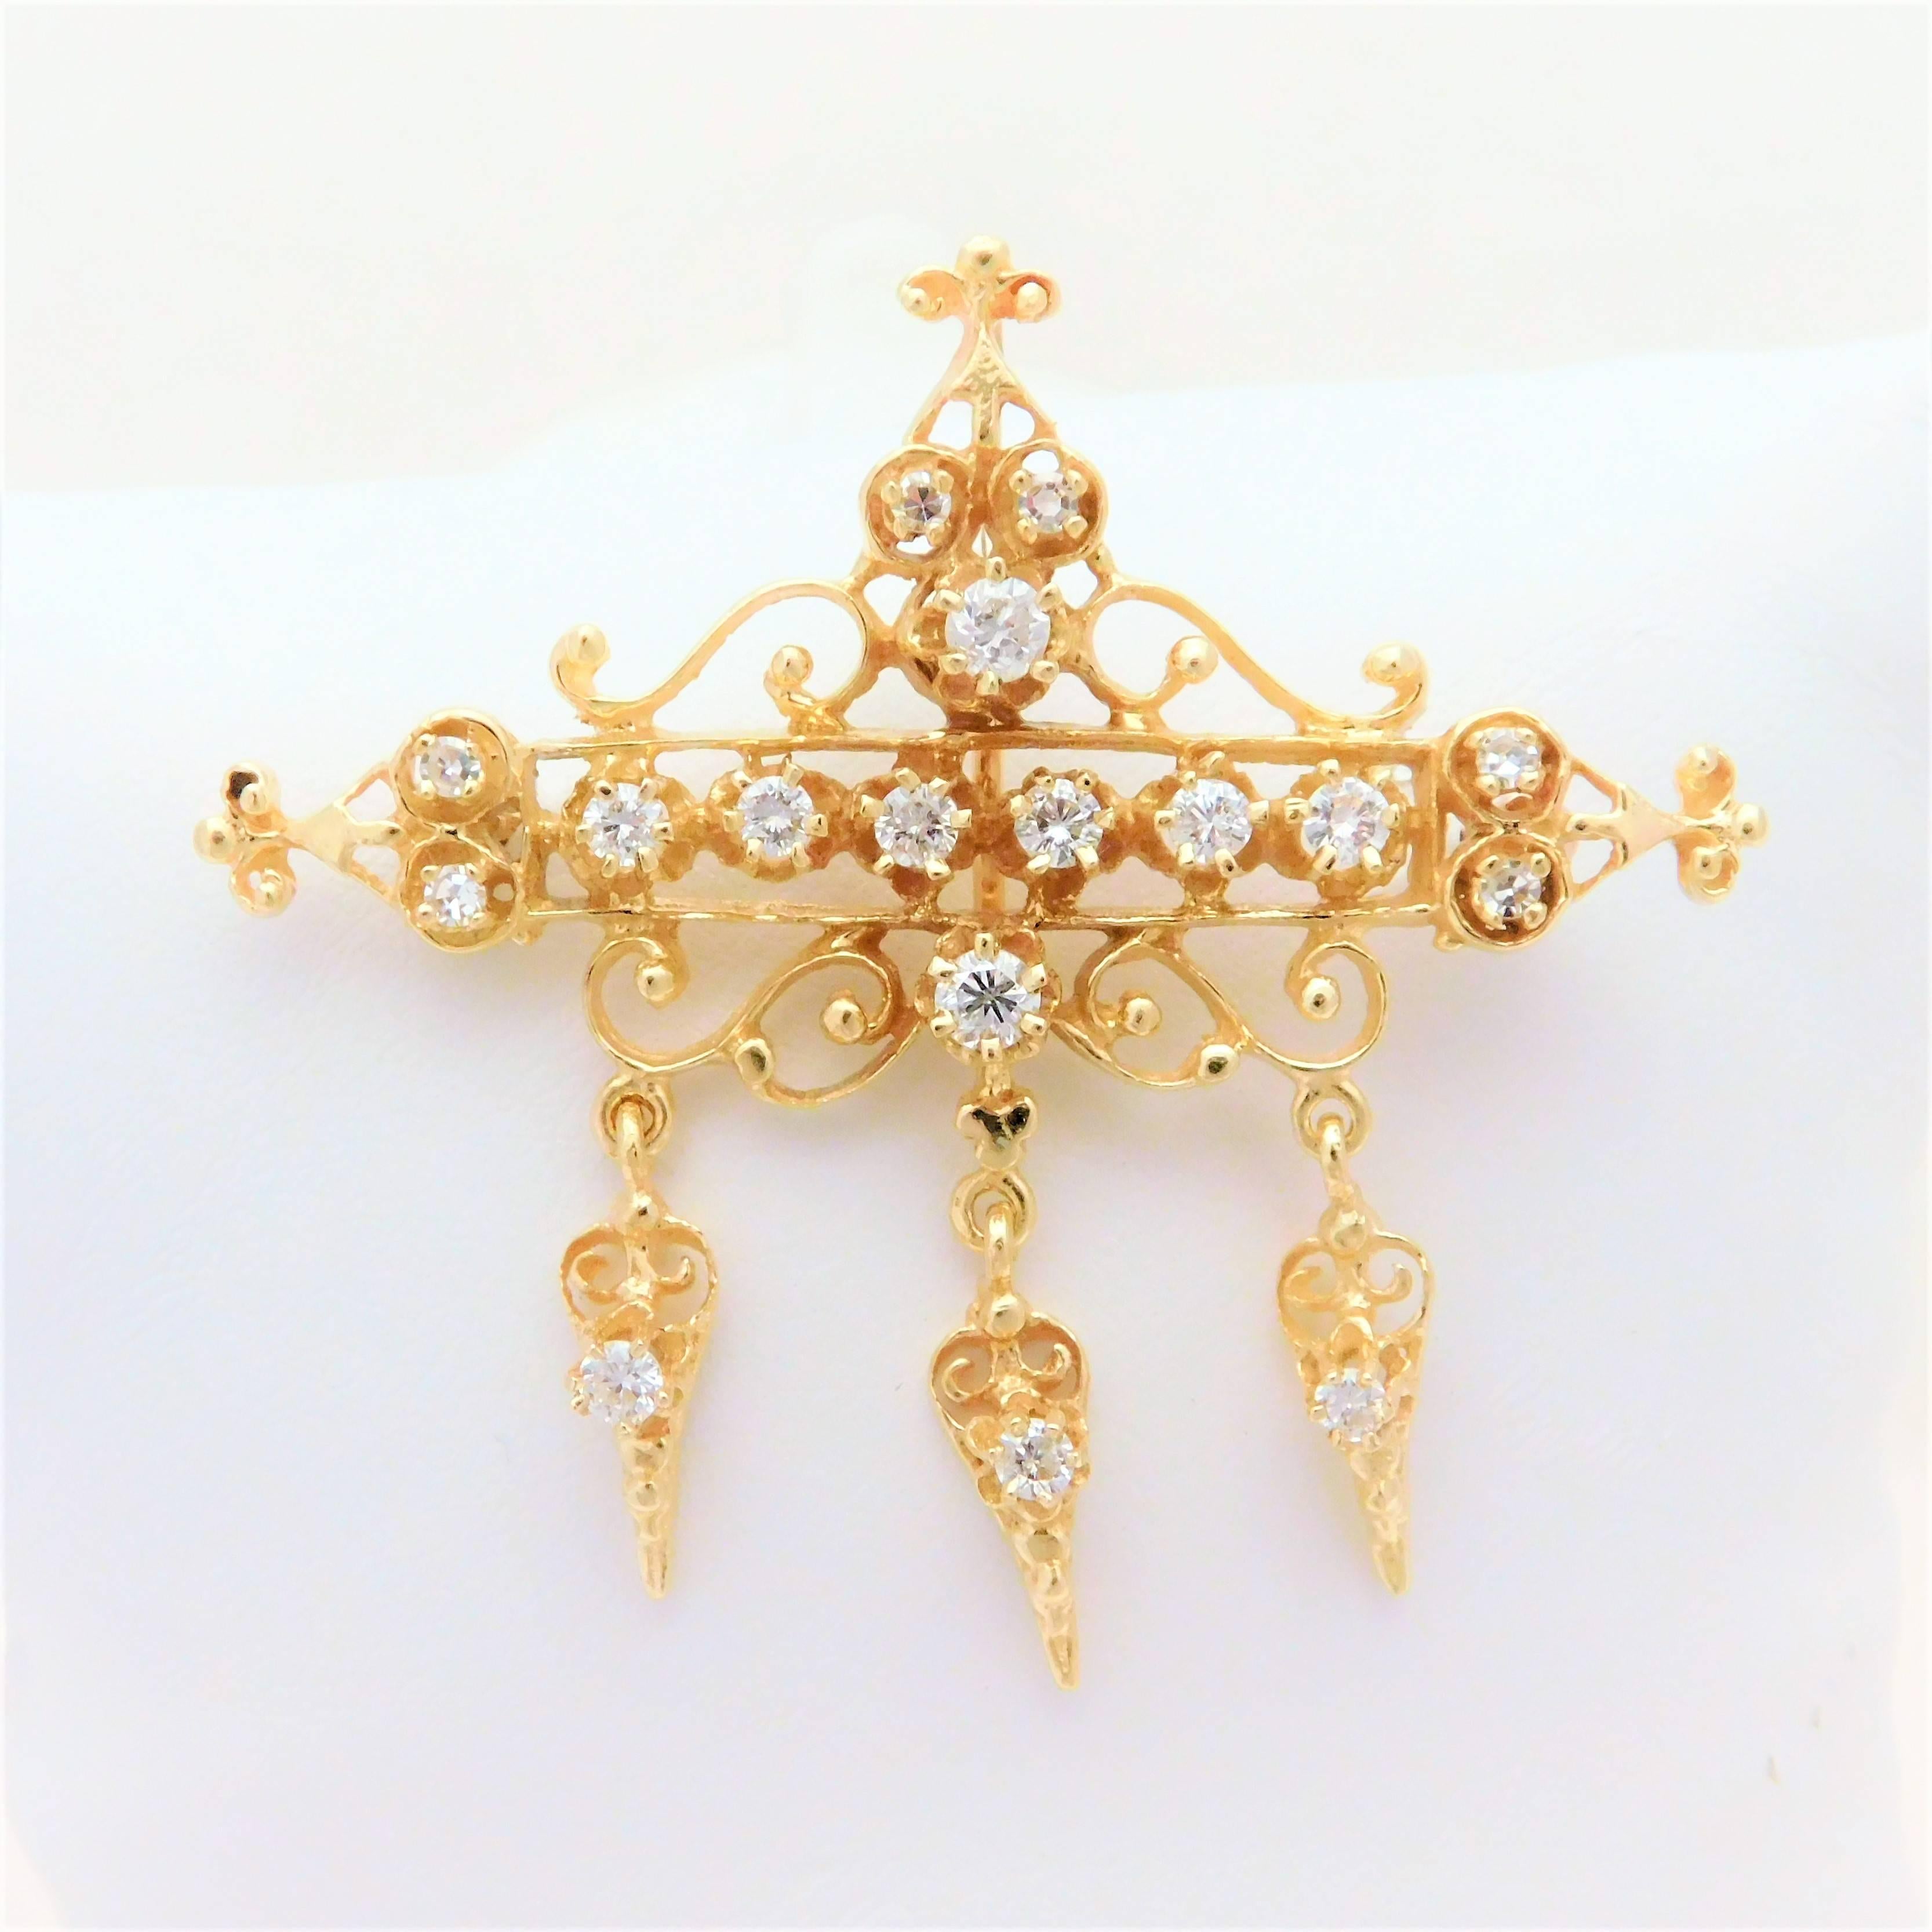 

An estate piece.  This ornate brooch has the ability to be worn as a pendant as well as a pin.  It is made of solid 14k yellow gold.  The intricate unique baroque style metal work as well as the bright dazzling stones make this piece a show